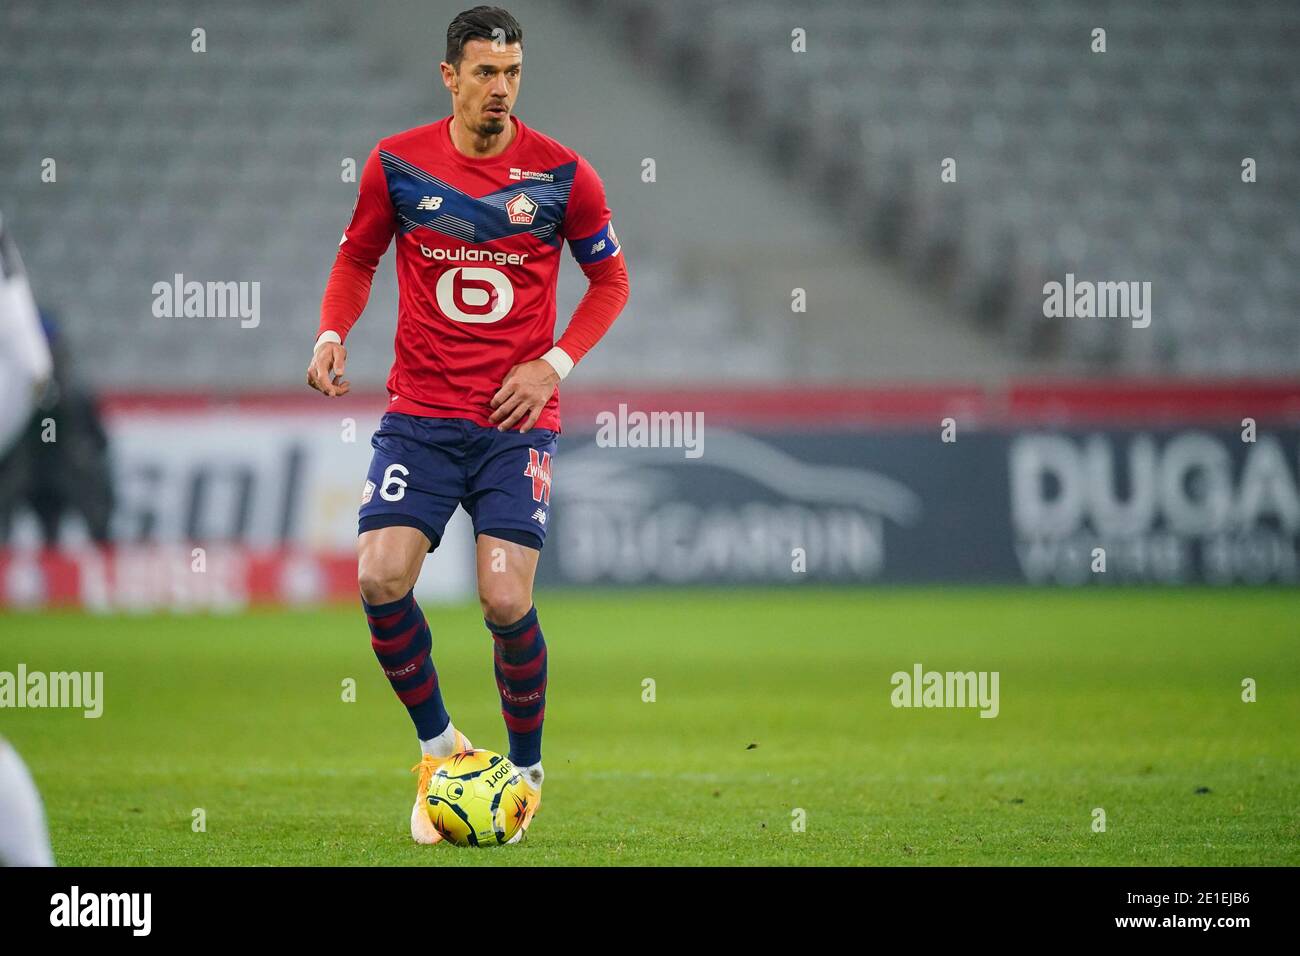 LILLE, FRANCE - JANUARY 6: Jose Fonte of Lille OSC during the Ligue 1 match between Lille OSC and Angers SCO at Stade Pierre Mauroy on January 6, 2021 in Lille, France (Photo by Jeroen Meuwsen/BSR Agency/Alamy Live News)*** Local Caption *** Jose Fonte Stock Photo